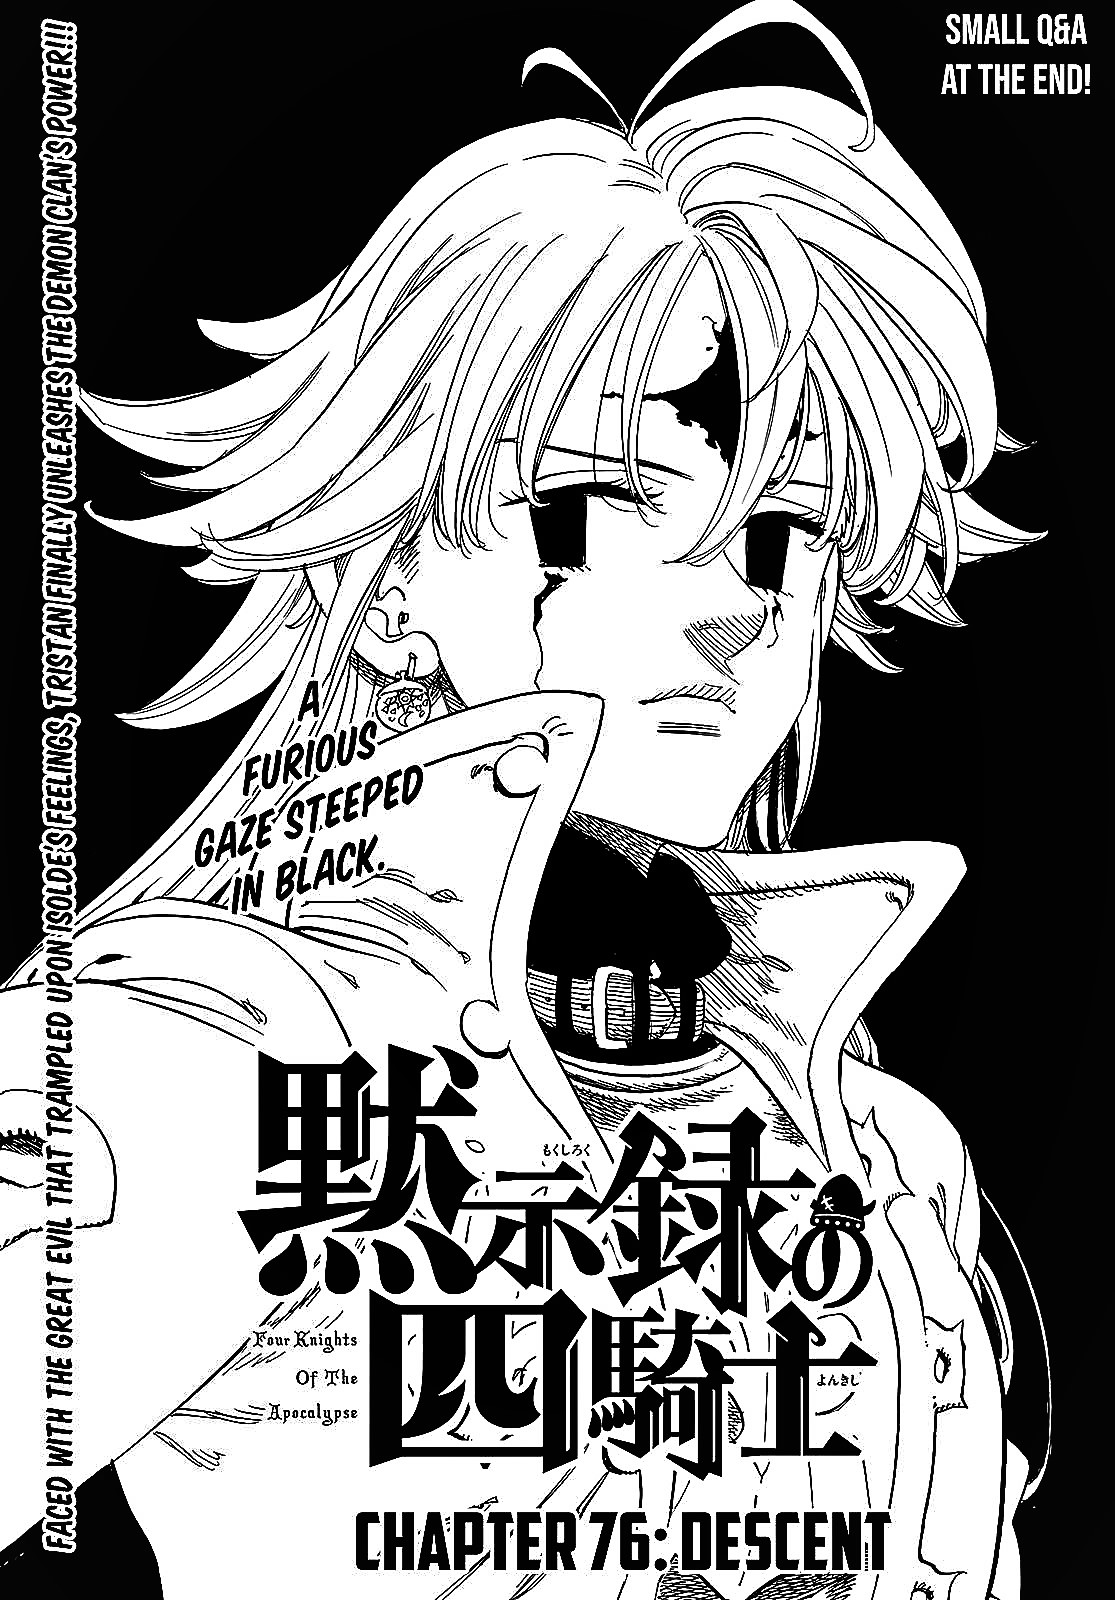 The King Descends! Four Knights Of The Apocalypse Chapter 76 BREAKDOWN